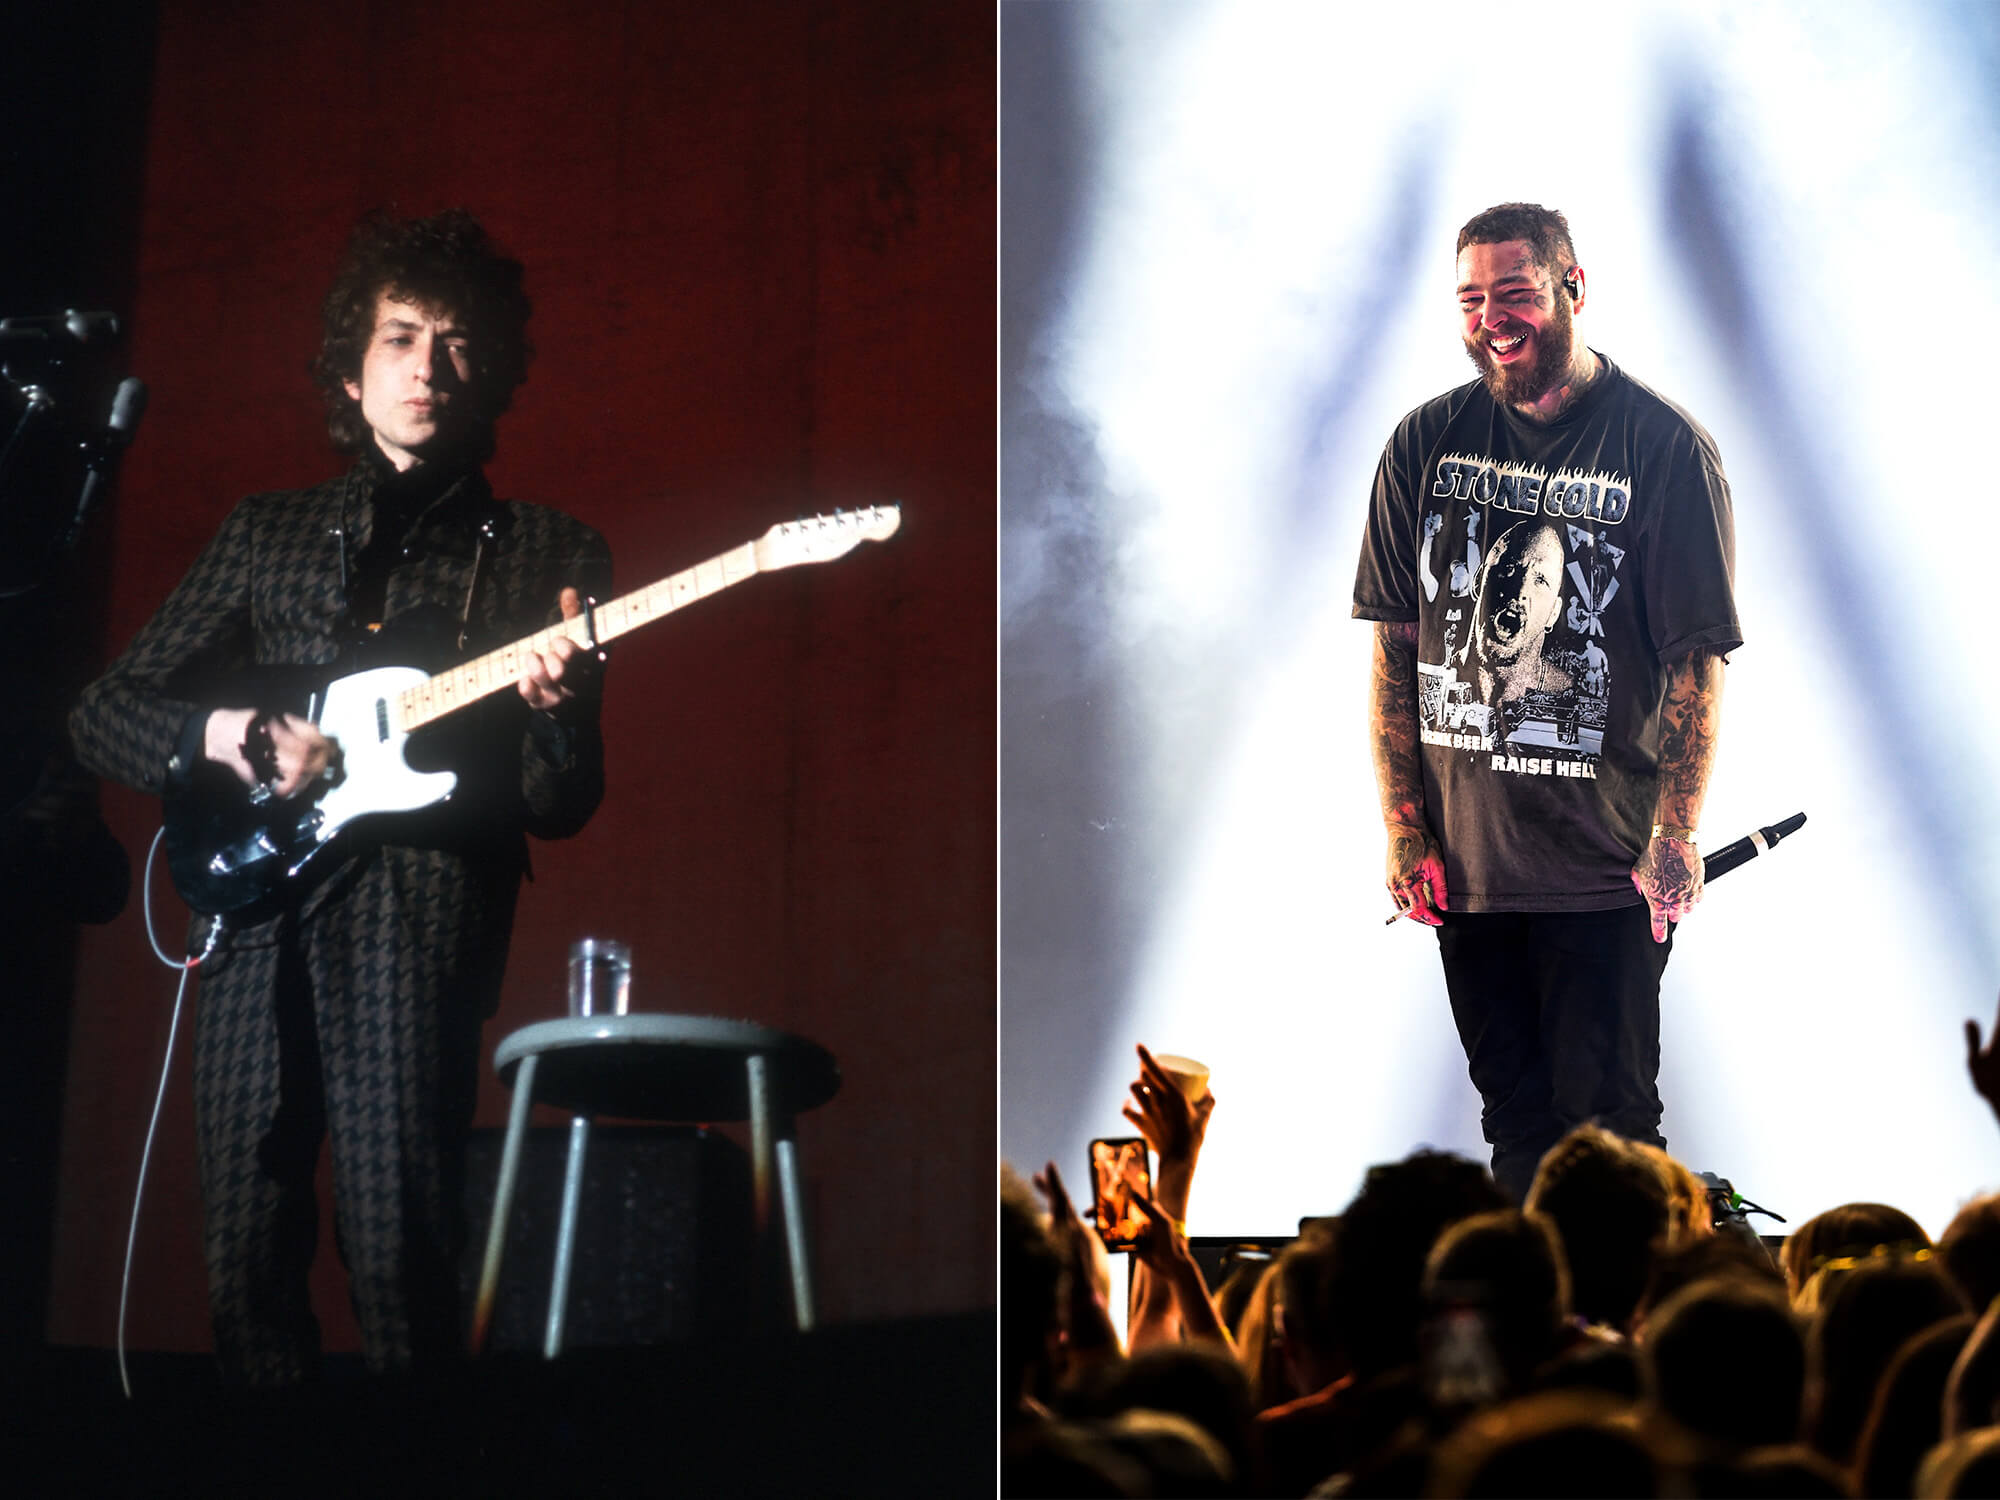 Bob Dylan on stage playing Telecaster (left), Post Malone on stage holding a mic and smiling down at fans (right)